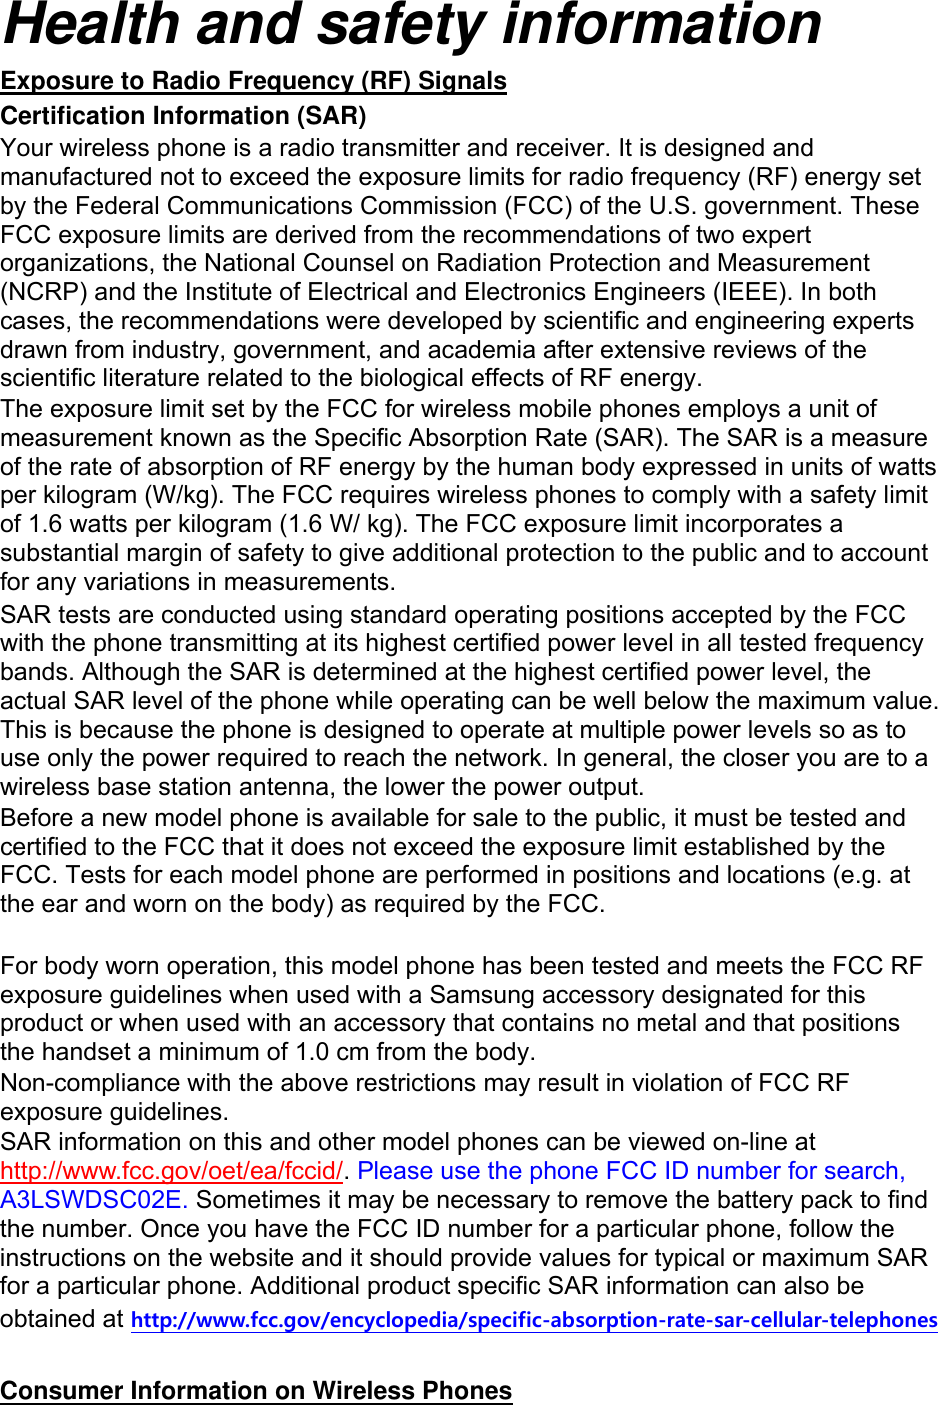 Health and safety information Exposure to Radio Frequency (RF) Signals Certification Information (SAR) Your wireless phone is a radio transmitter and receiver. It is designed and manufactured not to exceed the exposure limits for radio frequency (RF) energy set by the Federal Communications Commission (FCC) of the U.S. government. These FCC exposure limits are derived from the recommendations of two expert organizations, the National Counsel on Radiation Protection and Measurement (NCRP) and the Institute of Electrical and Electronics Engineers (IEEE). In both cases, the recommendations were developed by scientific and engineering experts drawn from industry, government, and academia after extensive reviews of the scientific literature related to the biological effects of RF energy. The exposure limit set by the FCC for wireless mobile phones employs a unit of measurement known as the Specific Absorption Rate (SAR). The SAR is a measure of the rate of absorption of RF energy by the human body expressed in units of watts per kilogram (W/kg). The FCC requires wireless phones to comply with a safety limit of 1.6 watts per kilogram (1.6 W/ kg). The FCC exposure limit incorporates a substantial margin of safety to give additional protection to the public and to account for any variations in measurements. SAR tests are conducted using standard operating positions accepted by the FCC with the phone transmitting at its highest certified power level in all tested frequency bands. Although the SAR is determined at the highest certified power level, the actual SAR level of the phone while operating can be well below the maximum value. This is because the phone is designed to operate at multiple power levels so as to use only the power required to reach the network. In general, the closer you are to a wireless base station antenna, the lower the power output. Before a new model phone is available for sale to the public, it must be tested and certified to the FCC that it does not exceed the exposure limit established by the FCC. Tests for each model phone are performed in positions and locations (e.g. at the ear and worn on the body) as required by the FCC.      For body worn operation, this model phone has been tested and meets the FCC RF exposure guidelines when used with a Samsung accessory designated for this product or when used with an accessory that contains no metal and that positions the handset a minimum of 1.0 cm from the body.   Non-compliance with the above restrictions may result in violation of FCC RF exposure guidelines. SAR information on this and other model phones can be viewed on-line at http://www.fcc.gov/oet/ea/fccid/. Please use the phone FCC ID number for search, A3LSWDSC02E. Sometimes it may be necessary to remove the battery pack to find the number. Once you have the FCC ID number for a particular phone, follow the instructions on the website and it should provide values for typical or maximum SAR for a particular phone. Additional product specific SAR information can also be obtained at http://www.fcc.gov/encyclopedia/specific-absorption-rate-sar-cellular-telephones  Consumer Information on Wireless Phones 